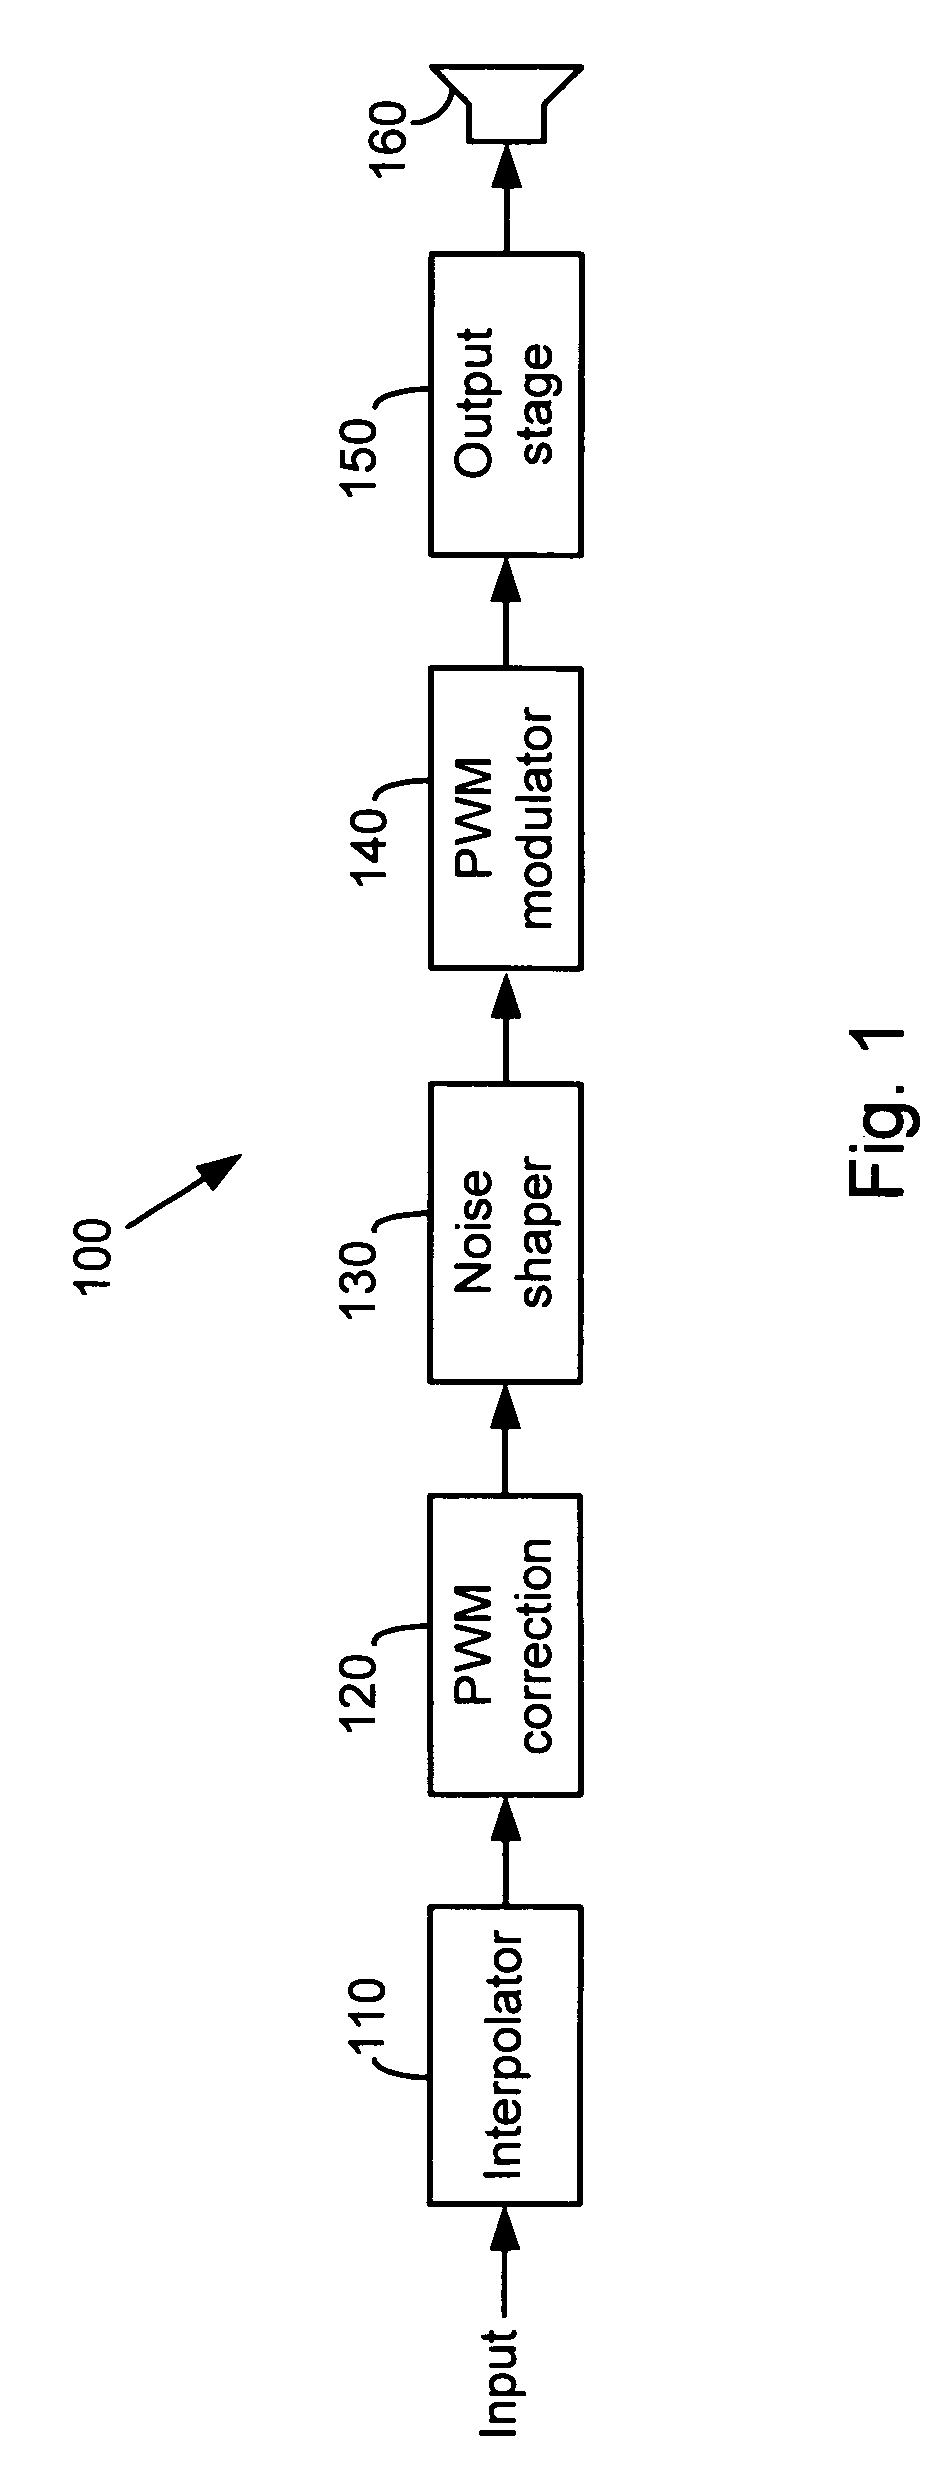 Systems and methods for providing multi channel pulse width modulated audio with staggered outputs